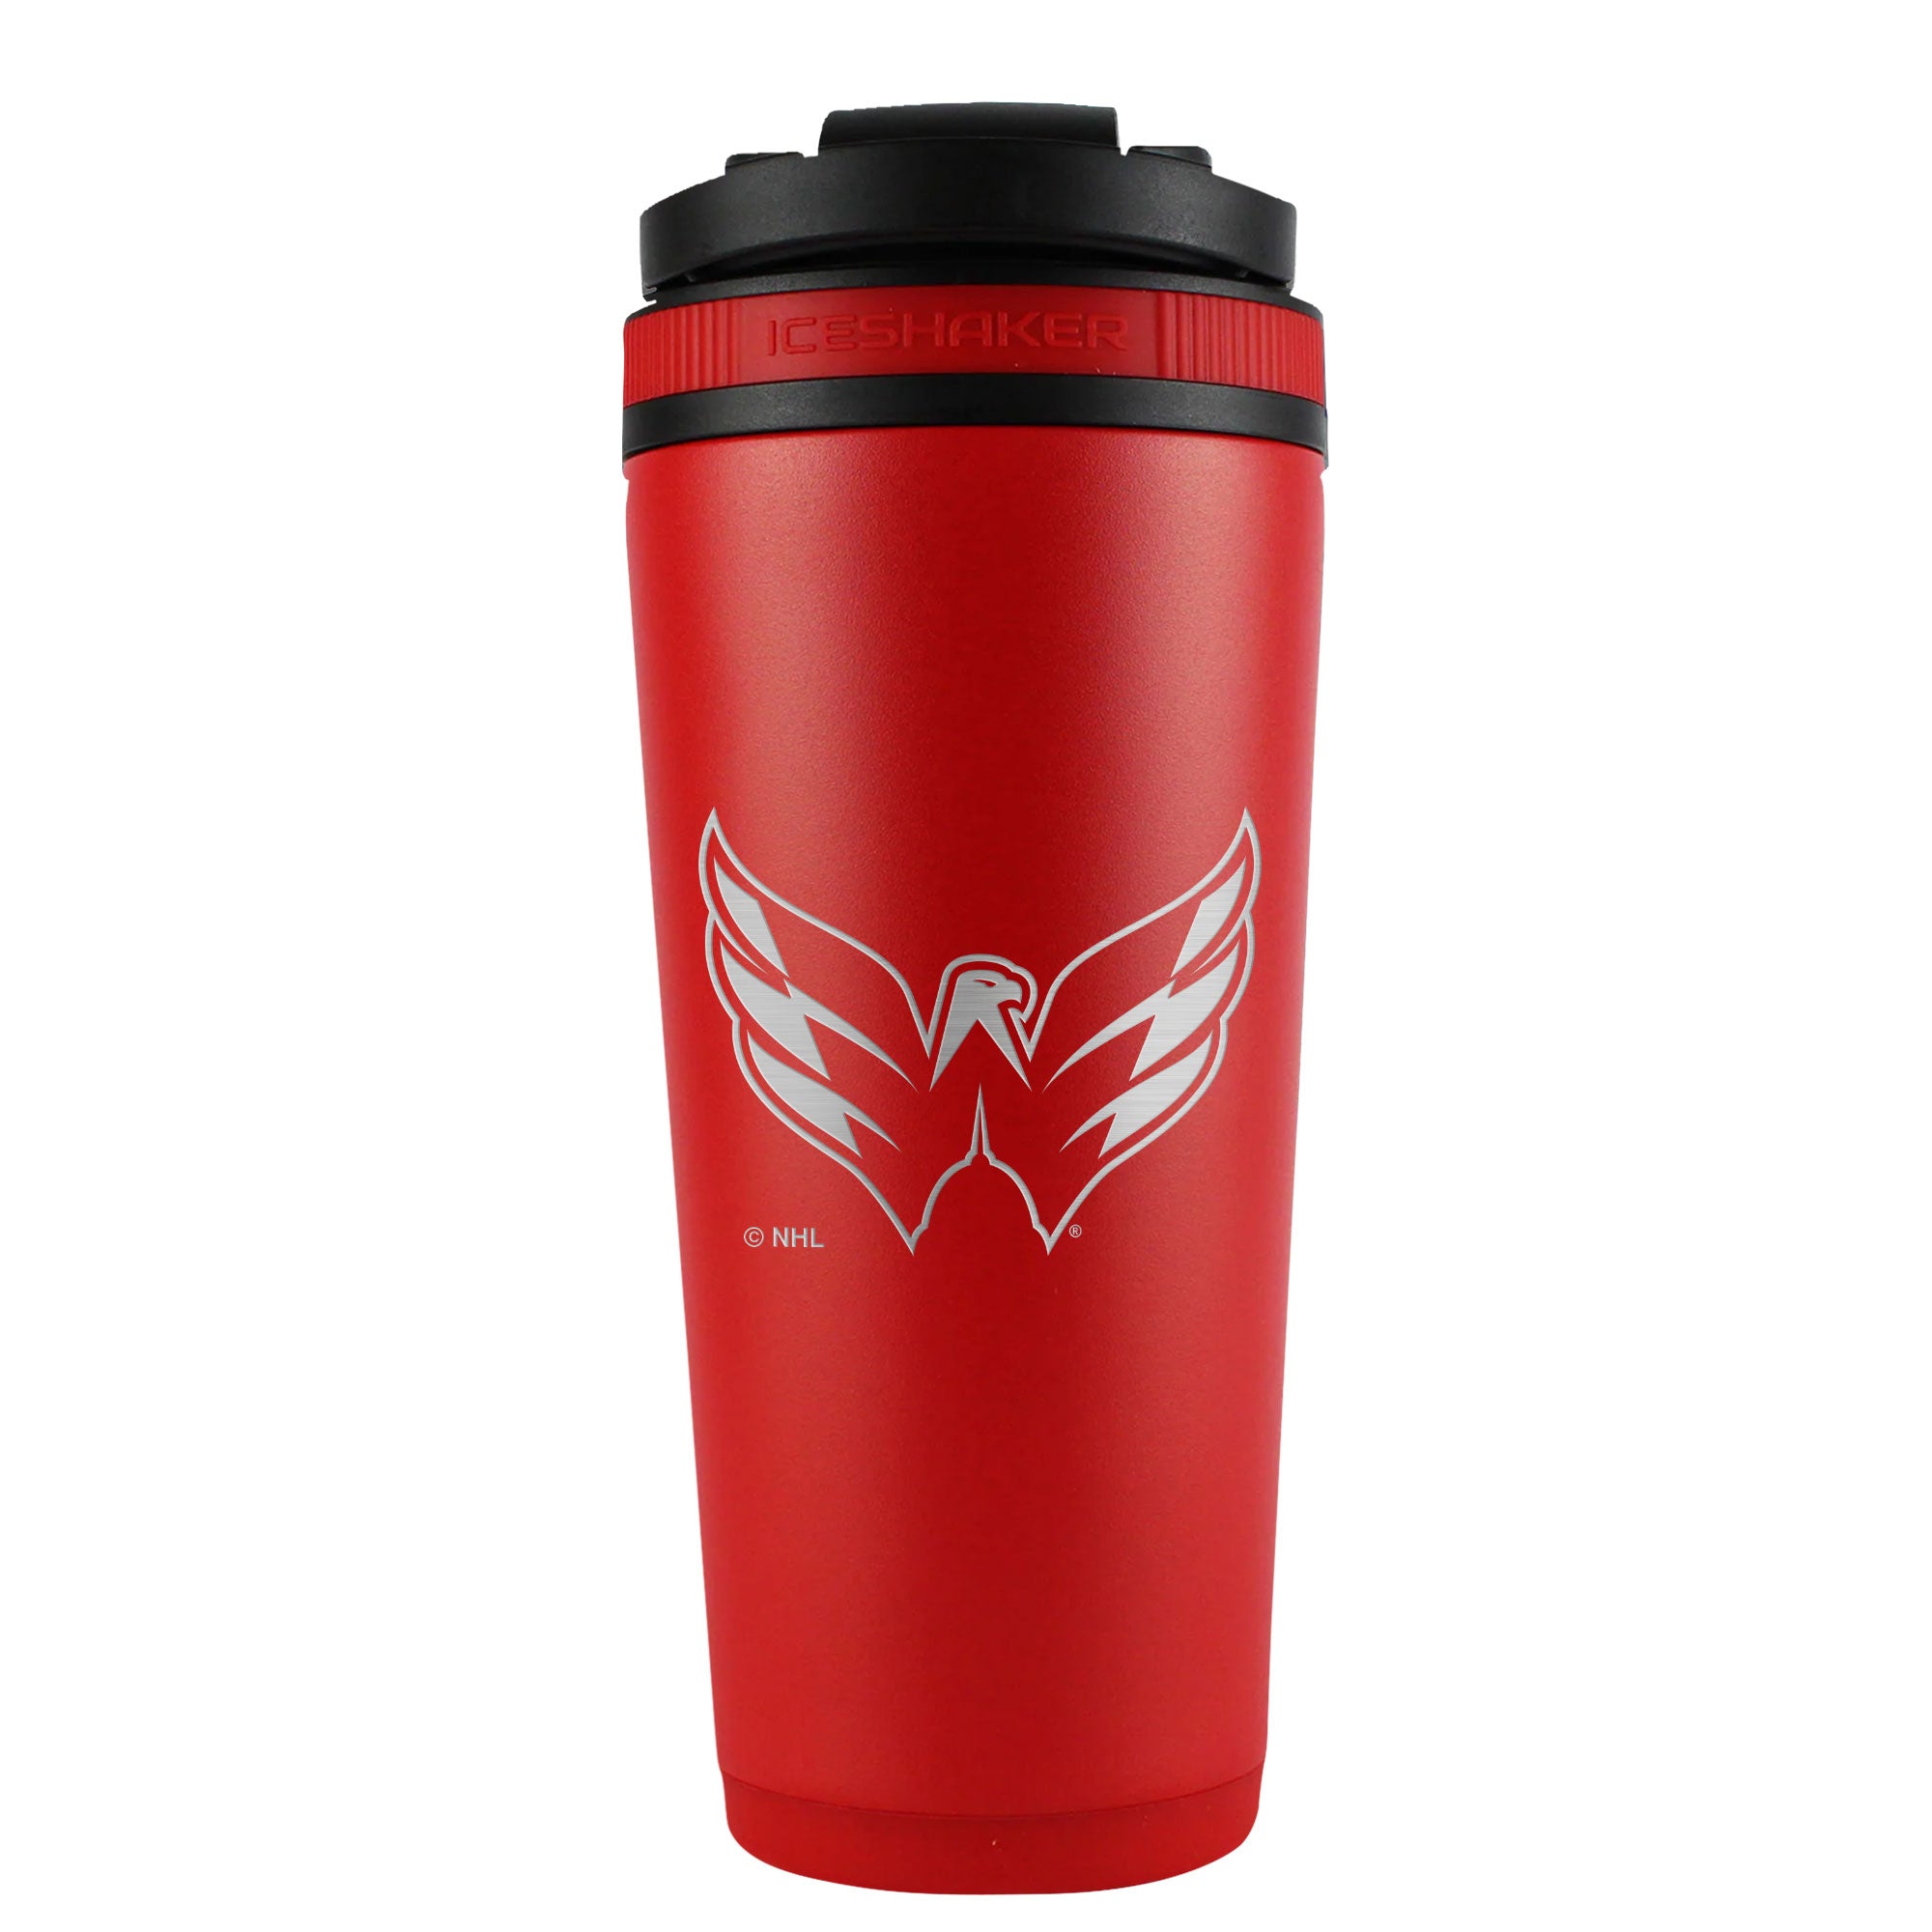 Officially Licensed Washington Capitals 26oz Ice Shaker - Red